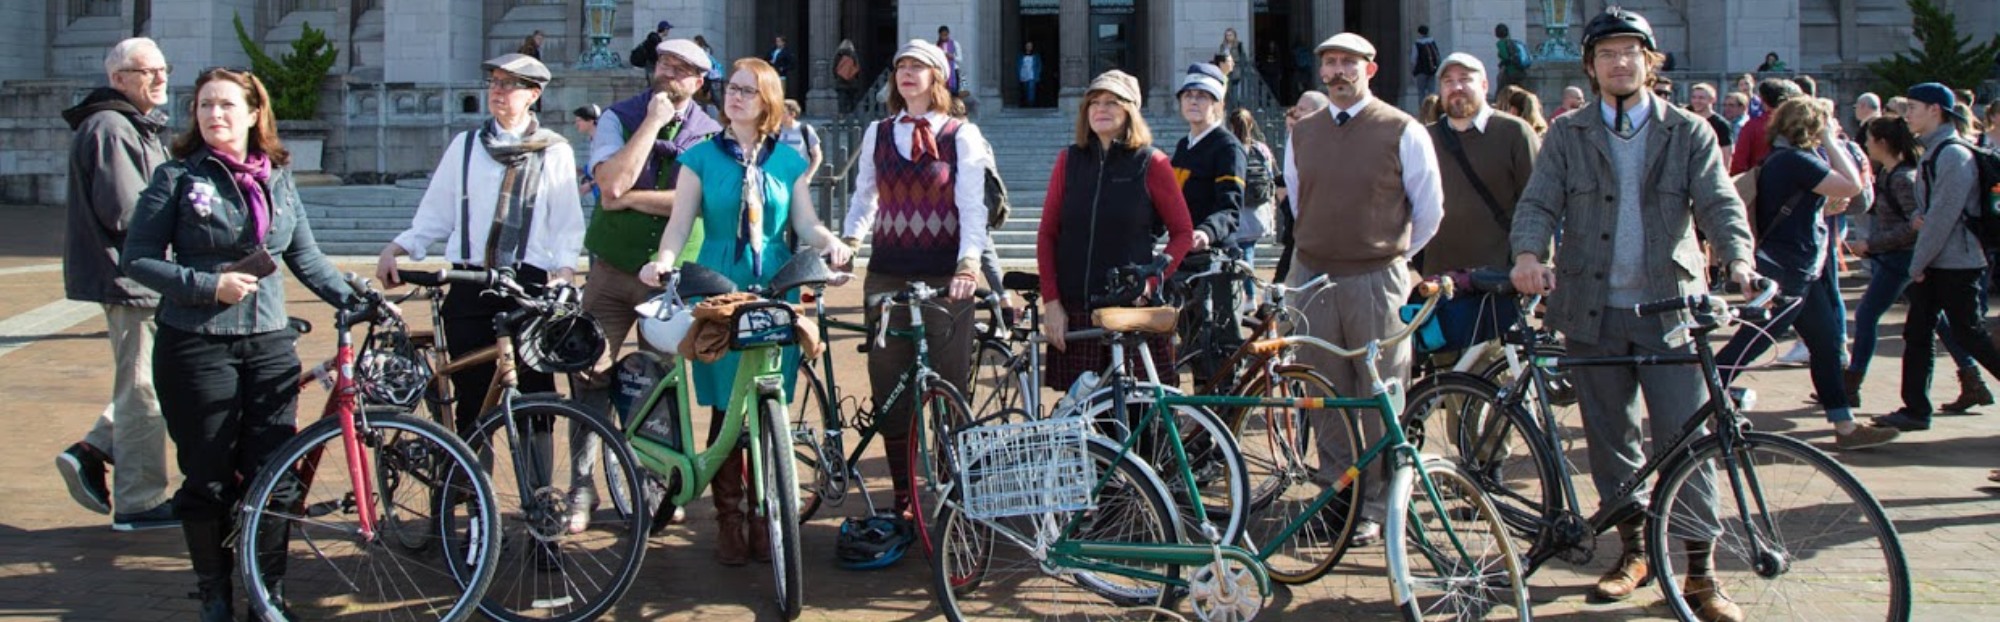 UW Tweed riders assembled in front of Suzzallo Library